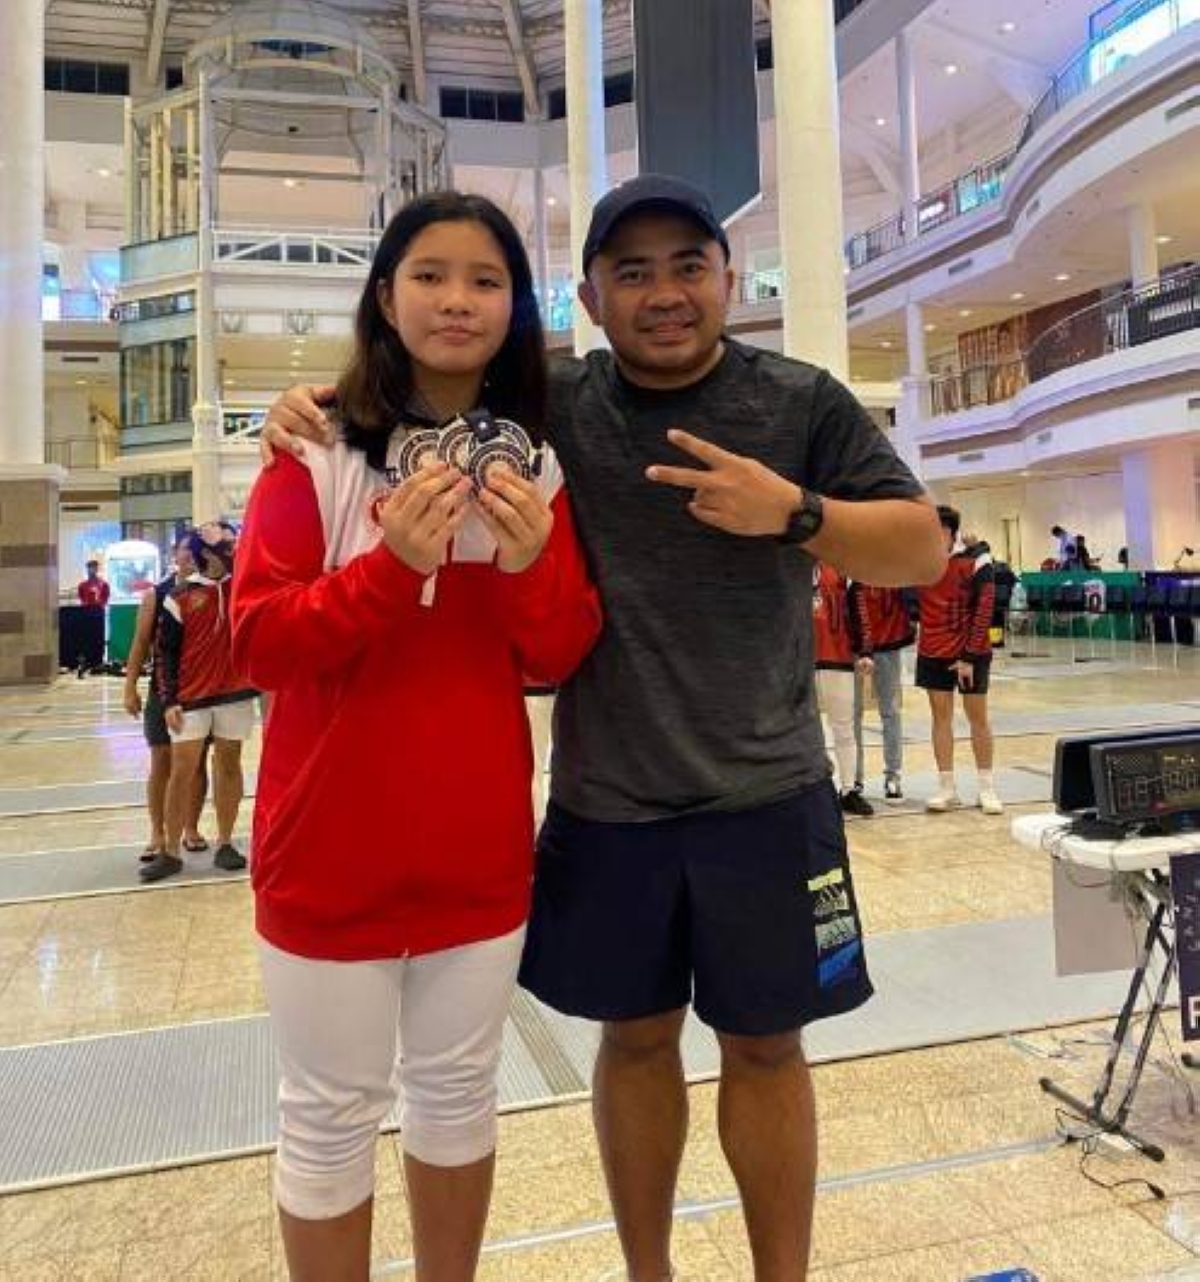 Sophia Catantan of University of the East/Canlas Fencing with coach Rolando “Amat” Canlas Jr. celebrate after winning her fourth gold medal in the 1st Burlington Inter-Club International Fencing Challenge at the Alabang Town Center in Muntinlupa City. CONTRIBUTED PHOTO